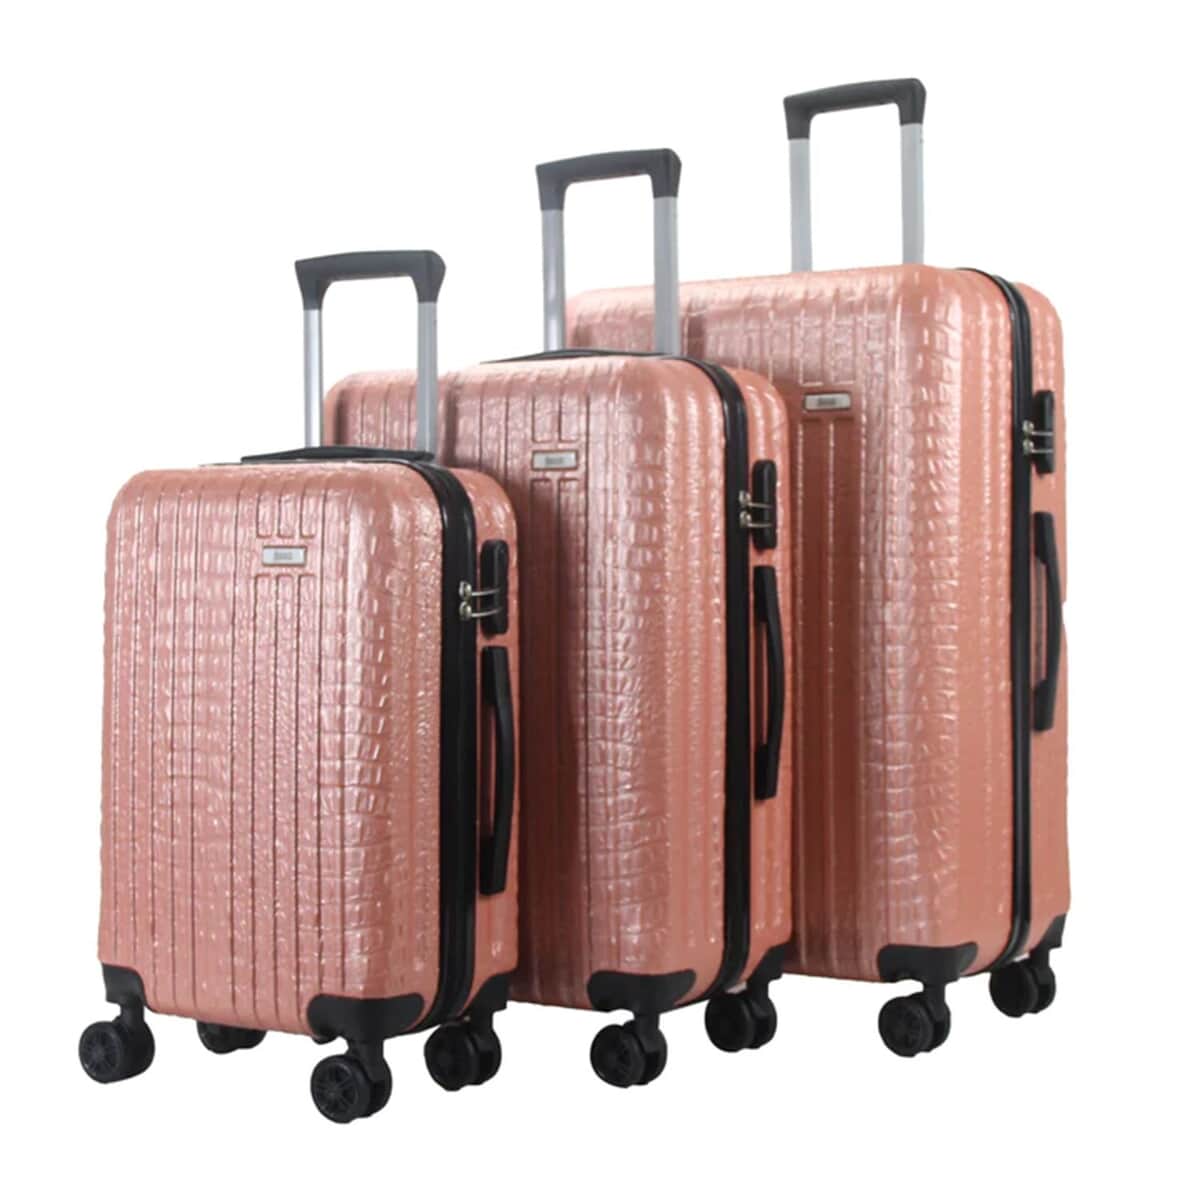 Mirage- Eileen 3 Piece Rose Gold Crocodile Embossed Luggage Set with Dual Spinning Wheels and Combo Lock (28, 24, 20) image number 4